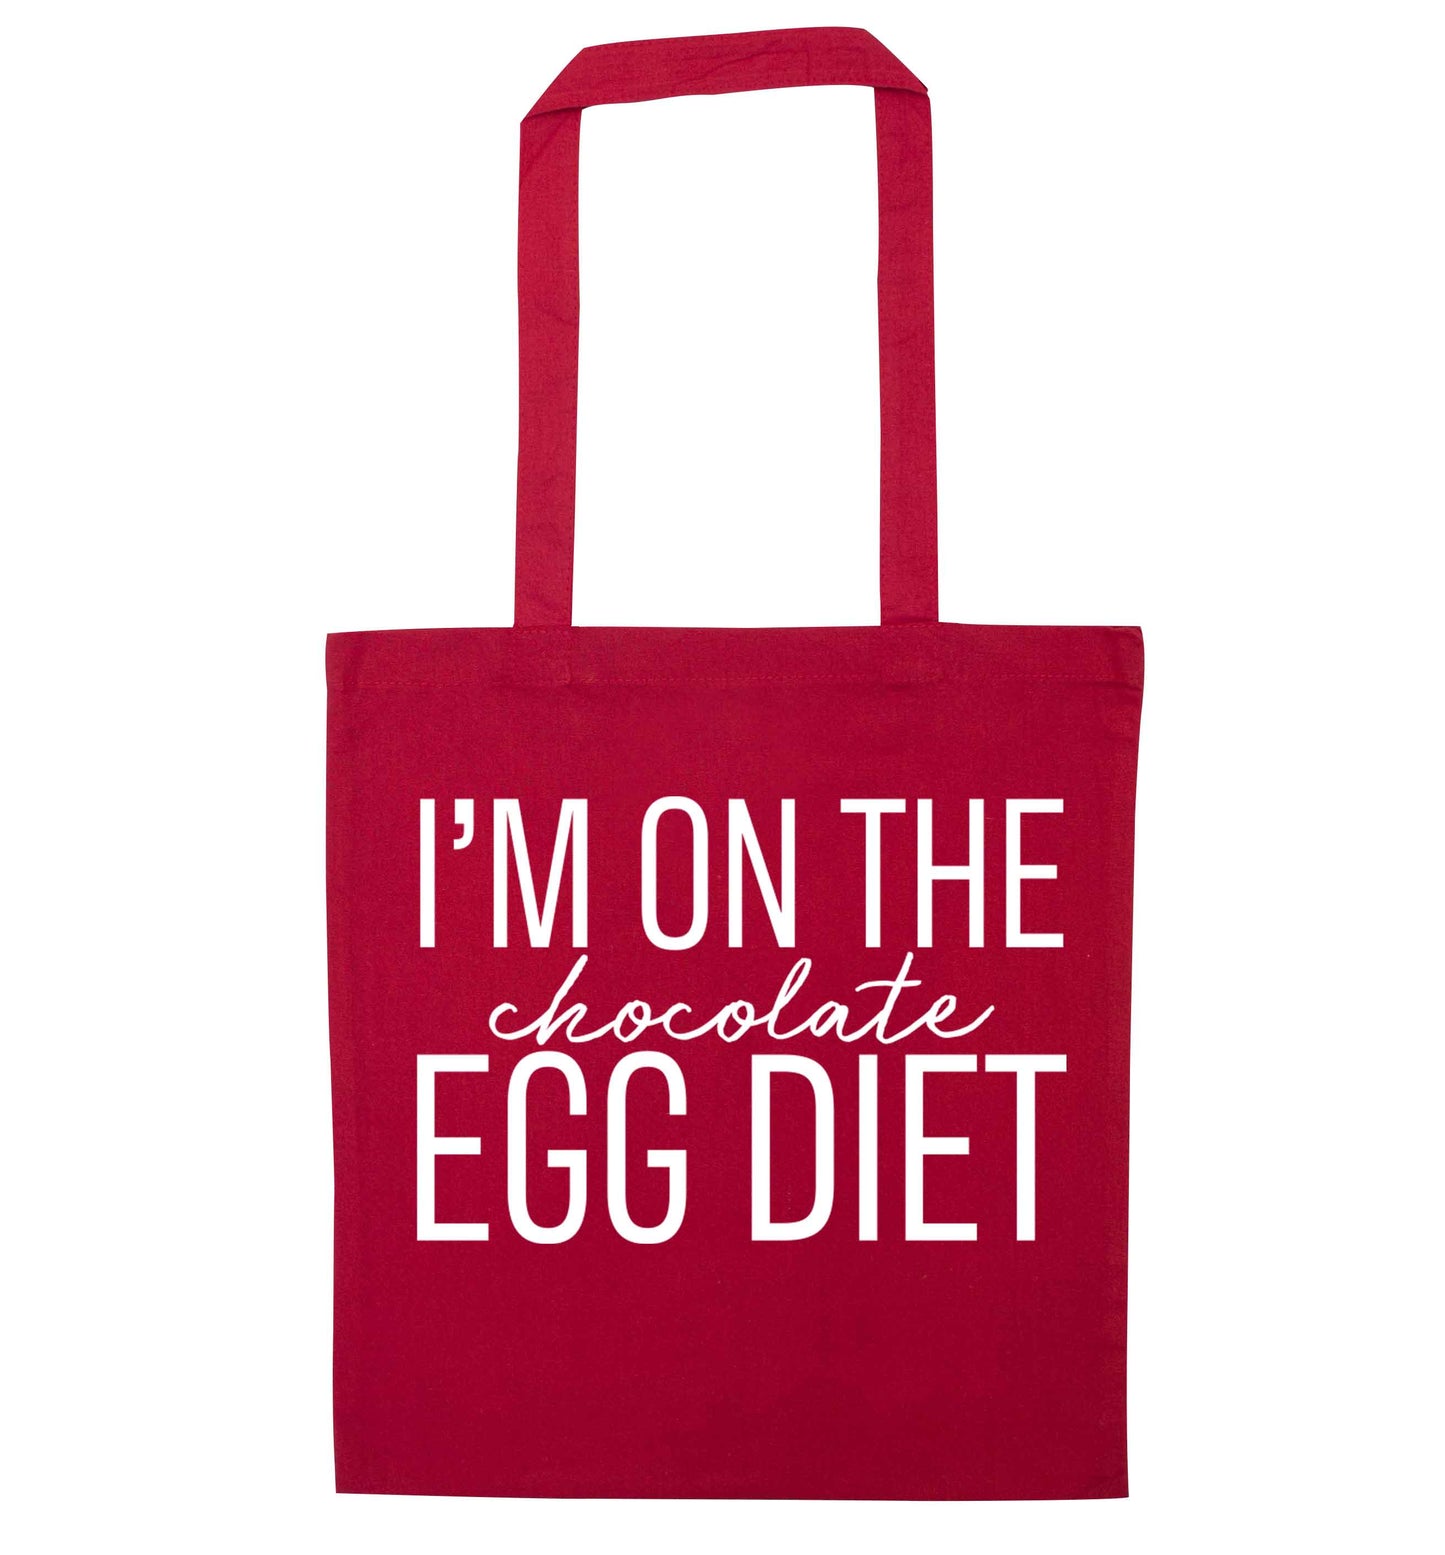 I'm on the chocolate egg diet red tote bag